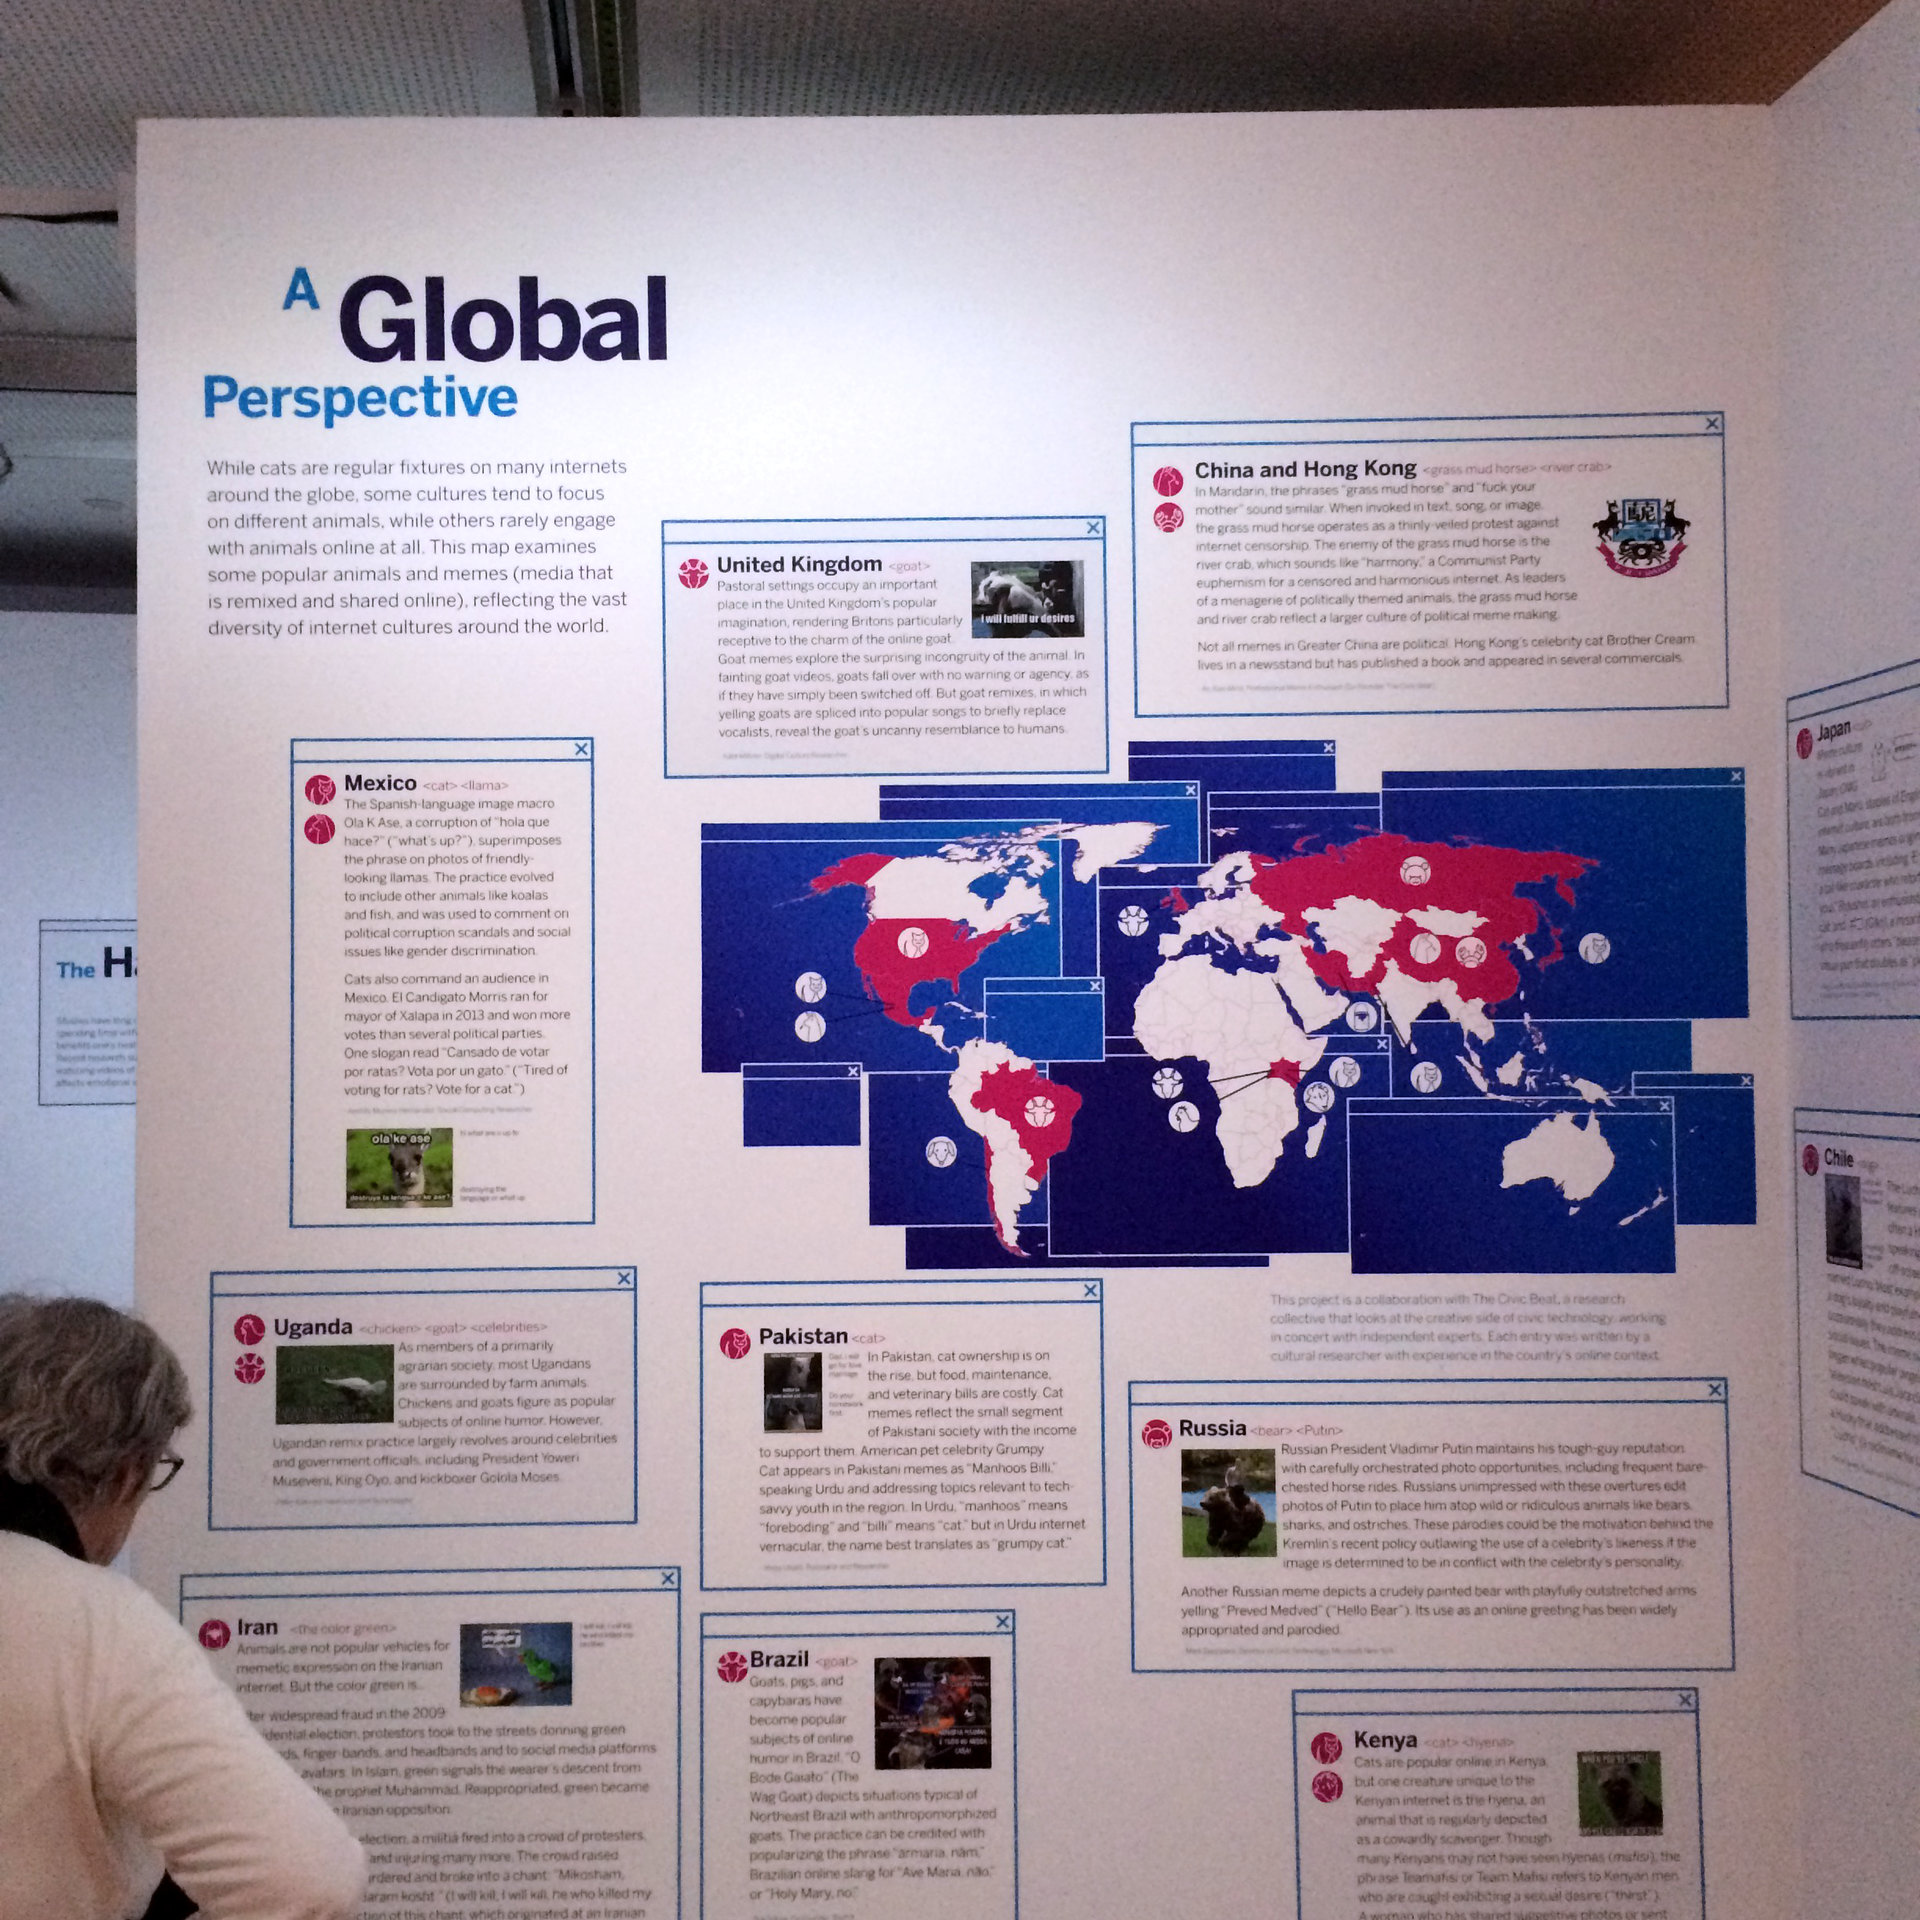 Photo of the Global Perspective wall with a world map in the middle